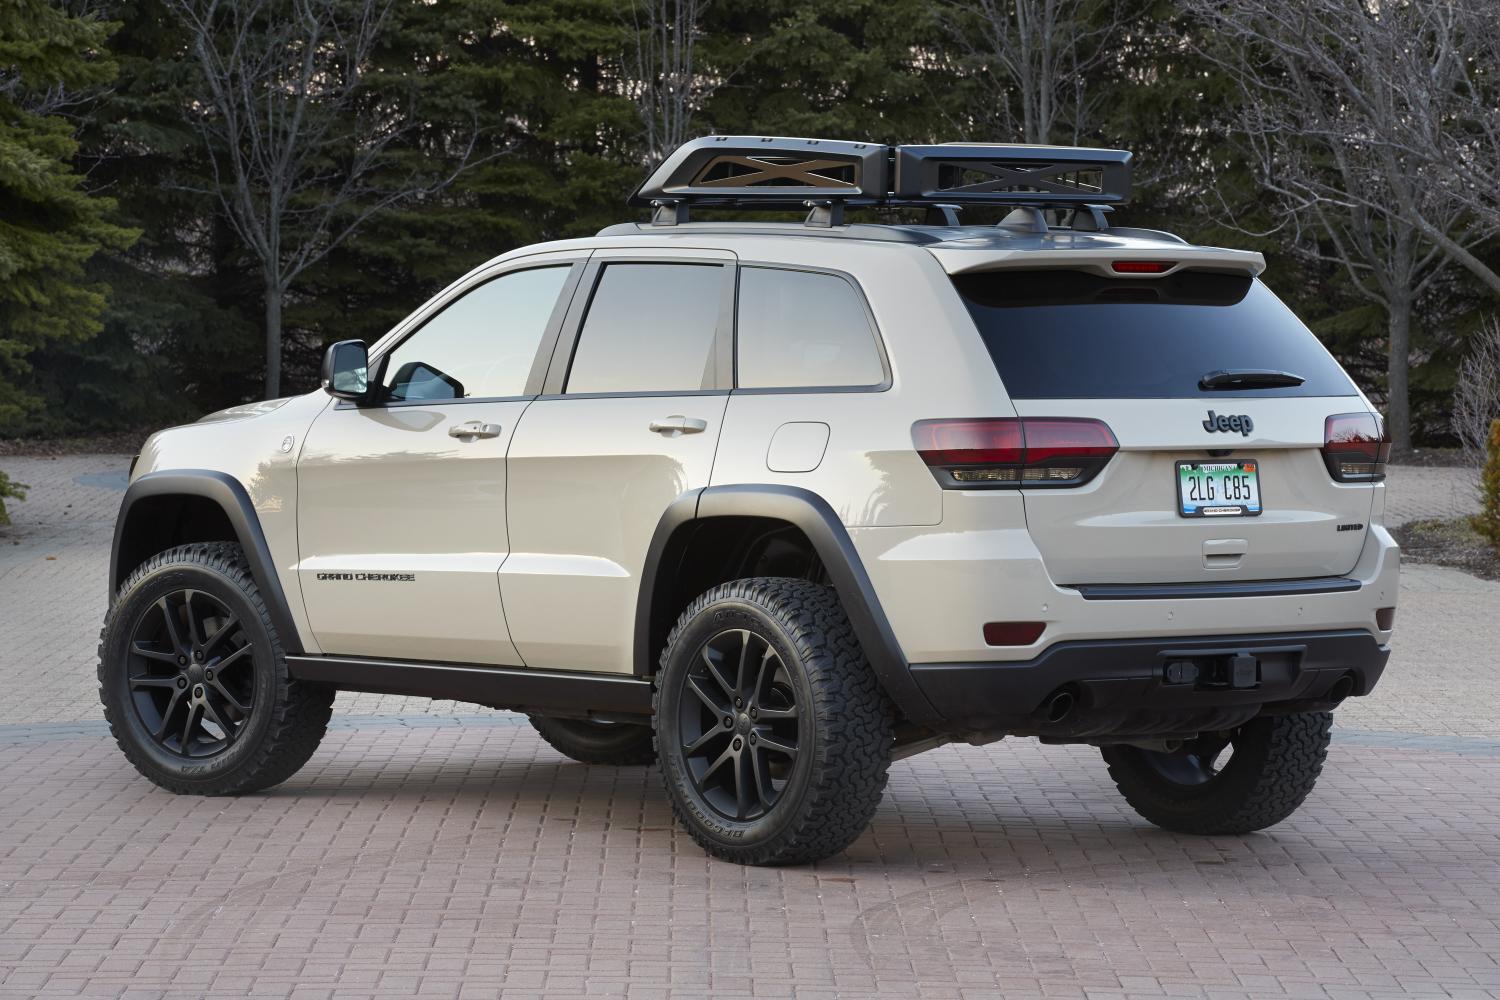 Check out the Jeep Grand Cherokee EcoDiesel Trail Warrior